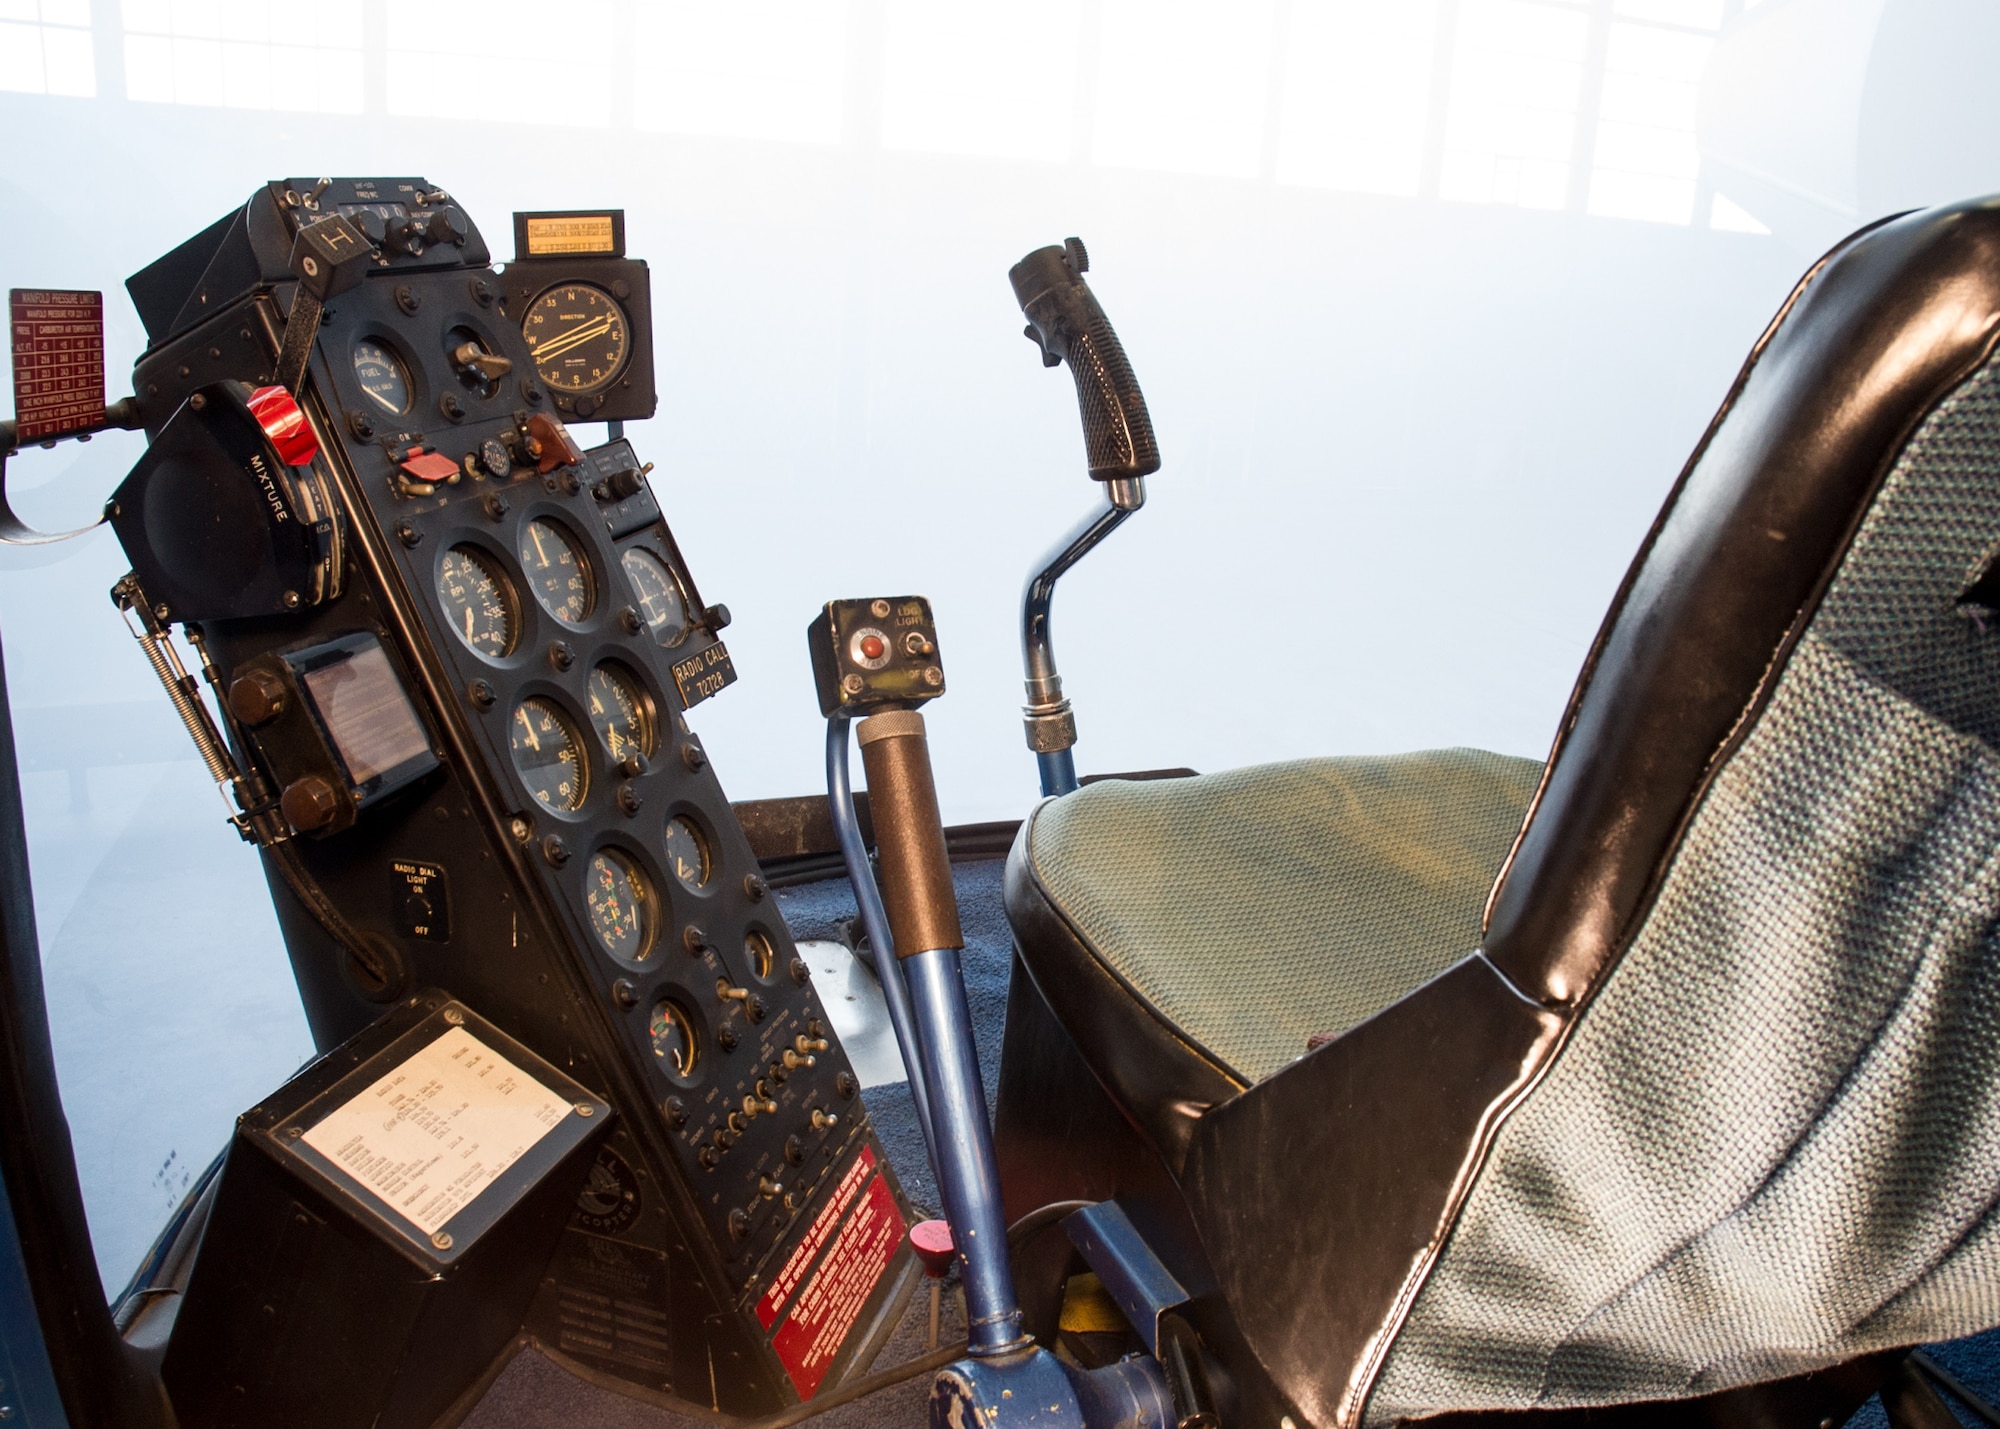 DAYTON, Ohio -- Bell UH-13J Sioux cockpit view in the Presidential Gallery at the National Museum of the United States Air Force. (U.S. Air Force photo by Ken LaRock)